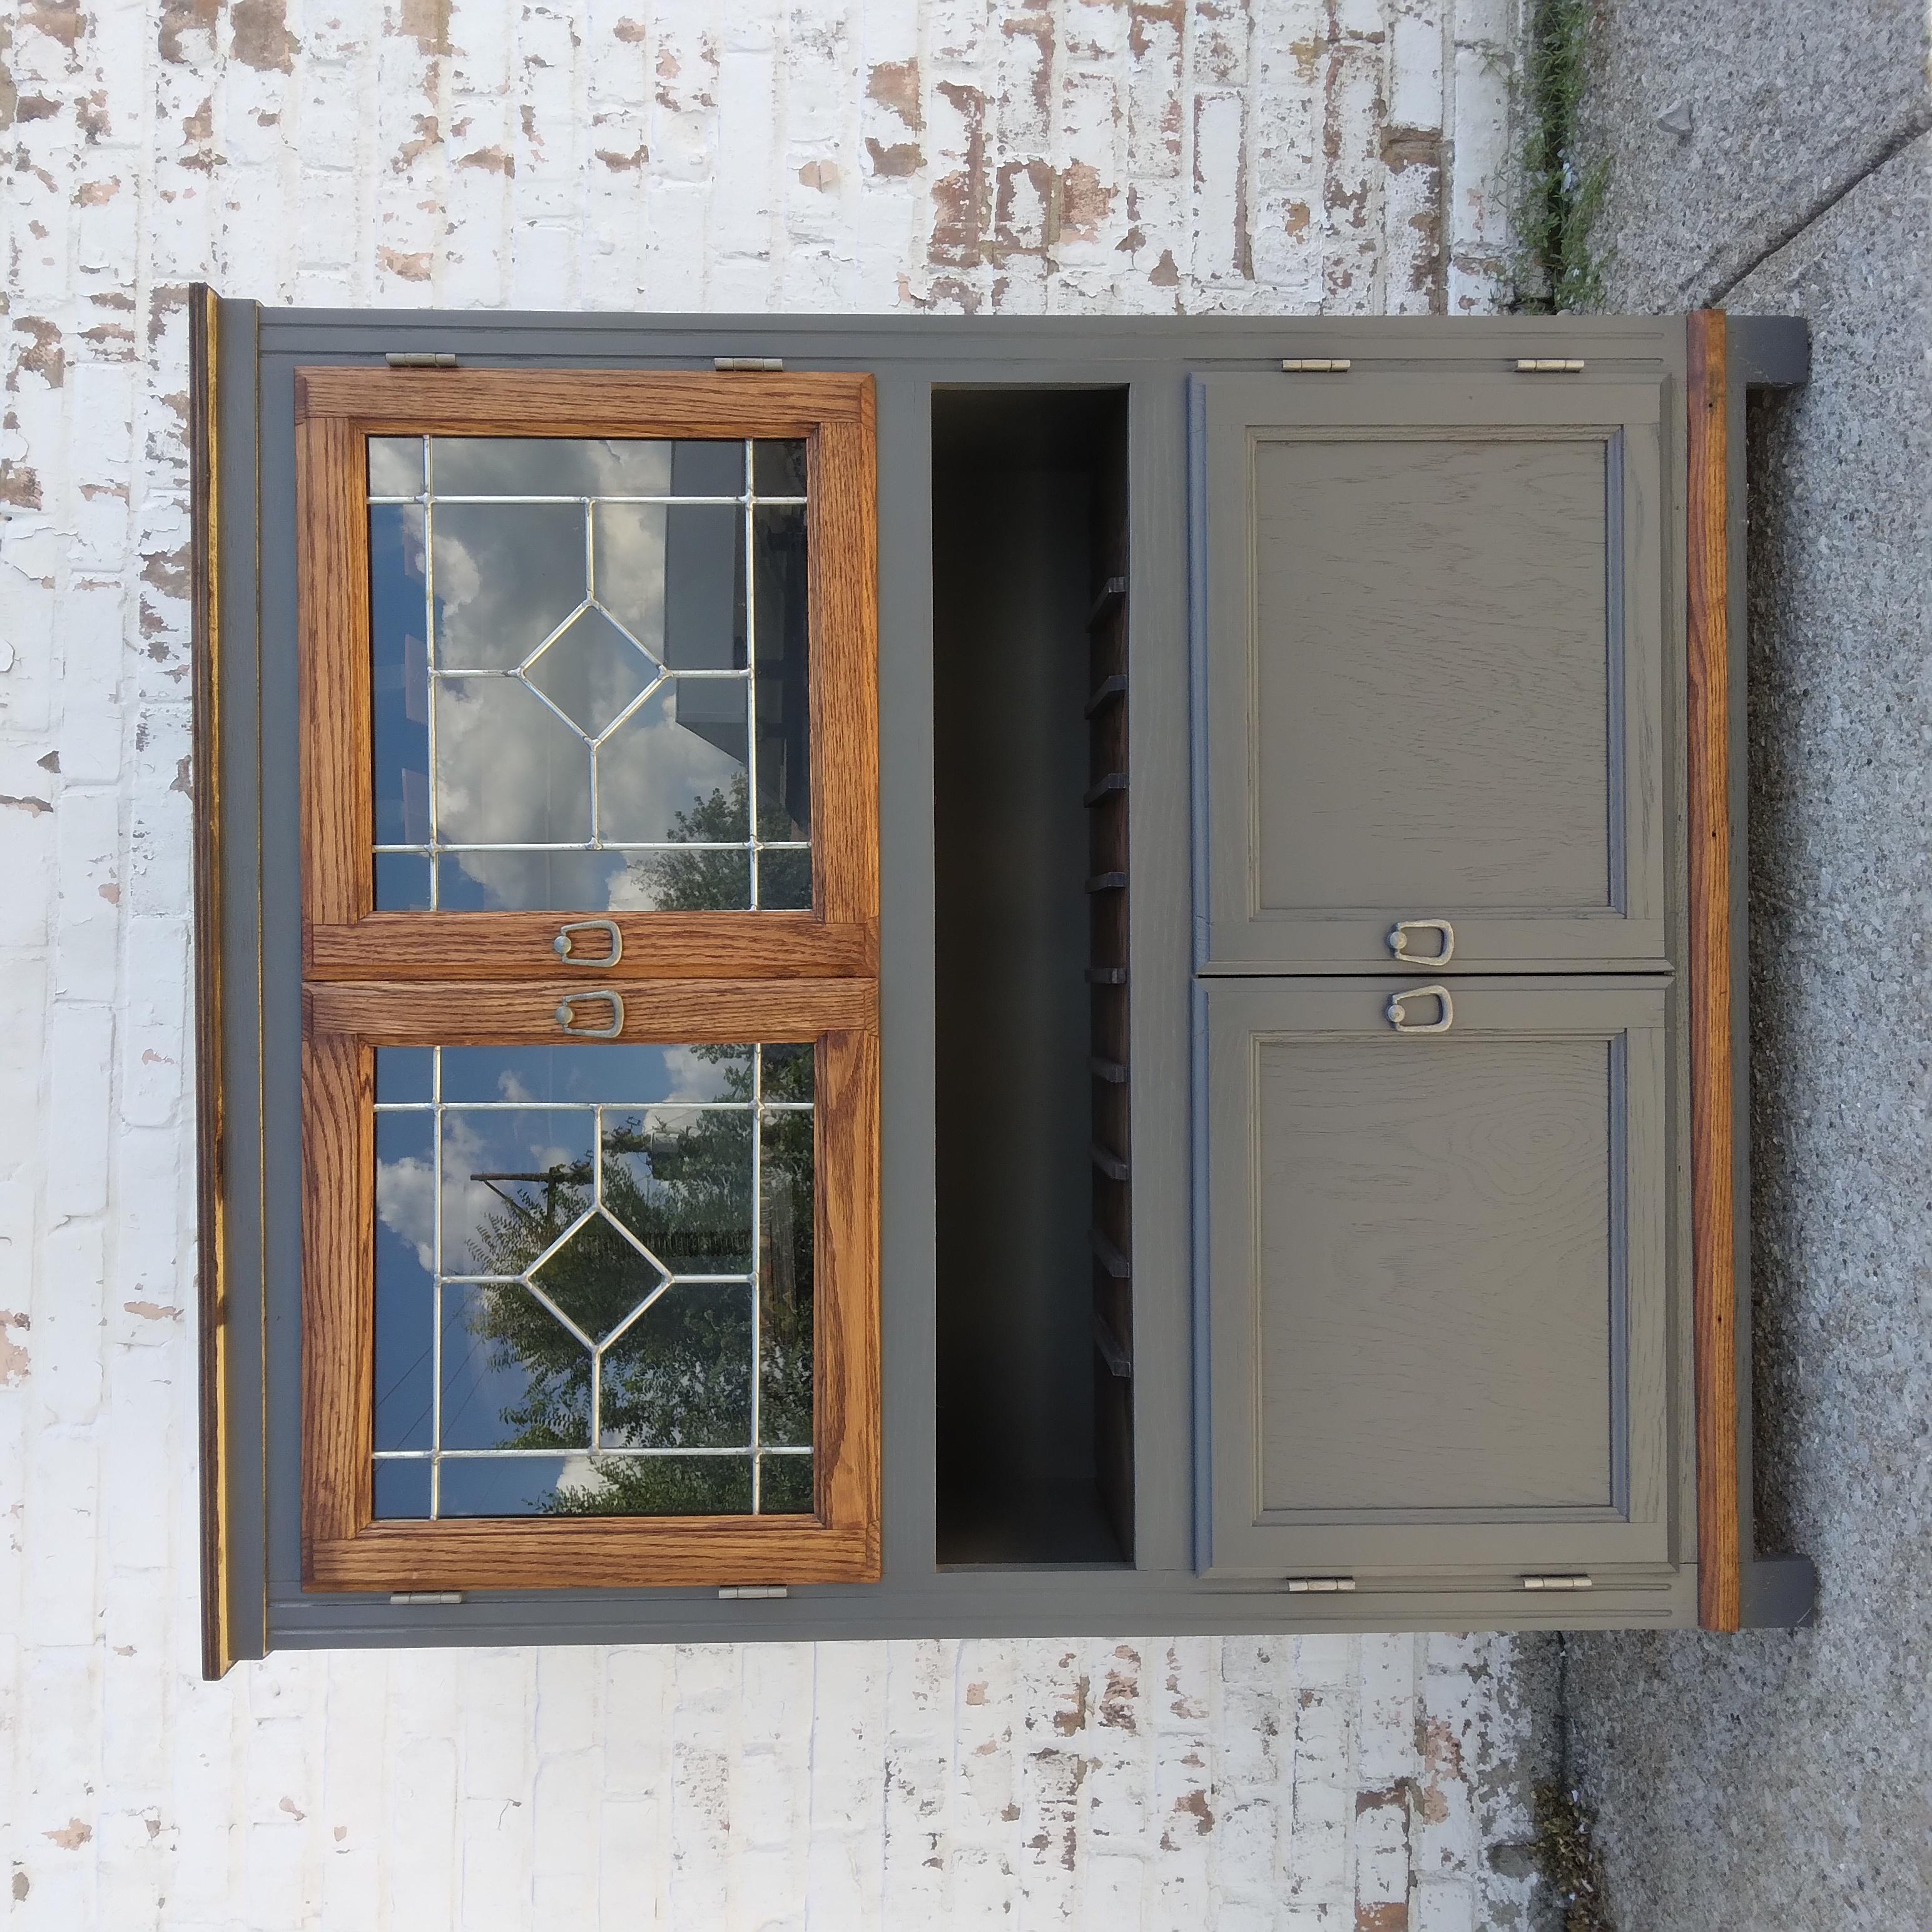 His industrial farmhouse bar cabinet is ready to find her new home. We love her paned windows and silver fixtures. Thinly veiled behind the transparent door is our favorite part -- a two-tiered rotary table for stemless glasses. She also contains